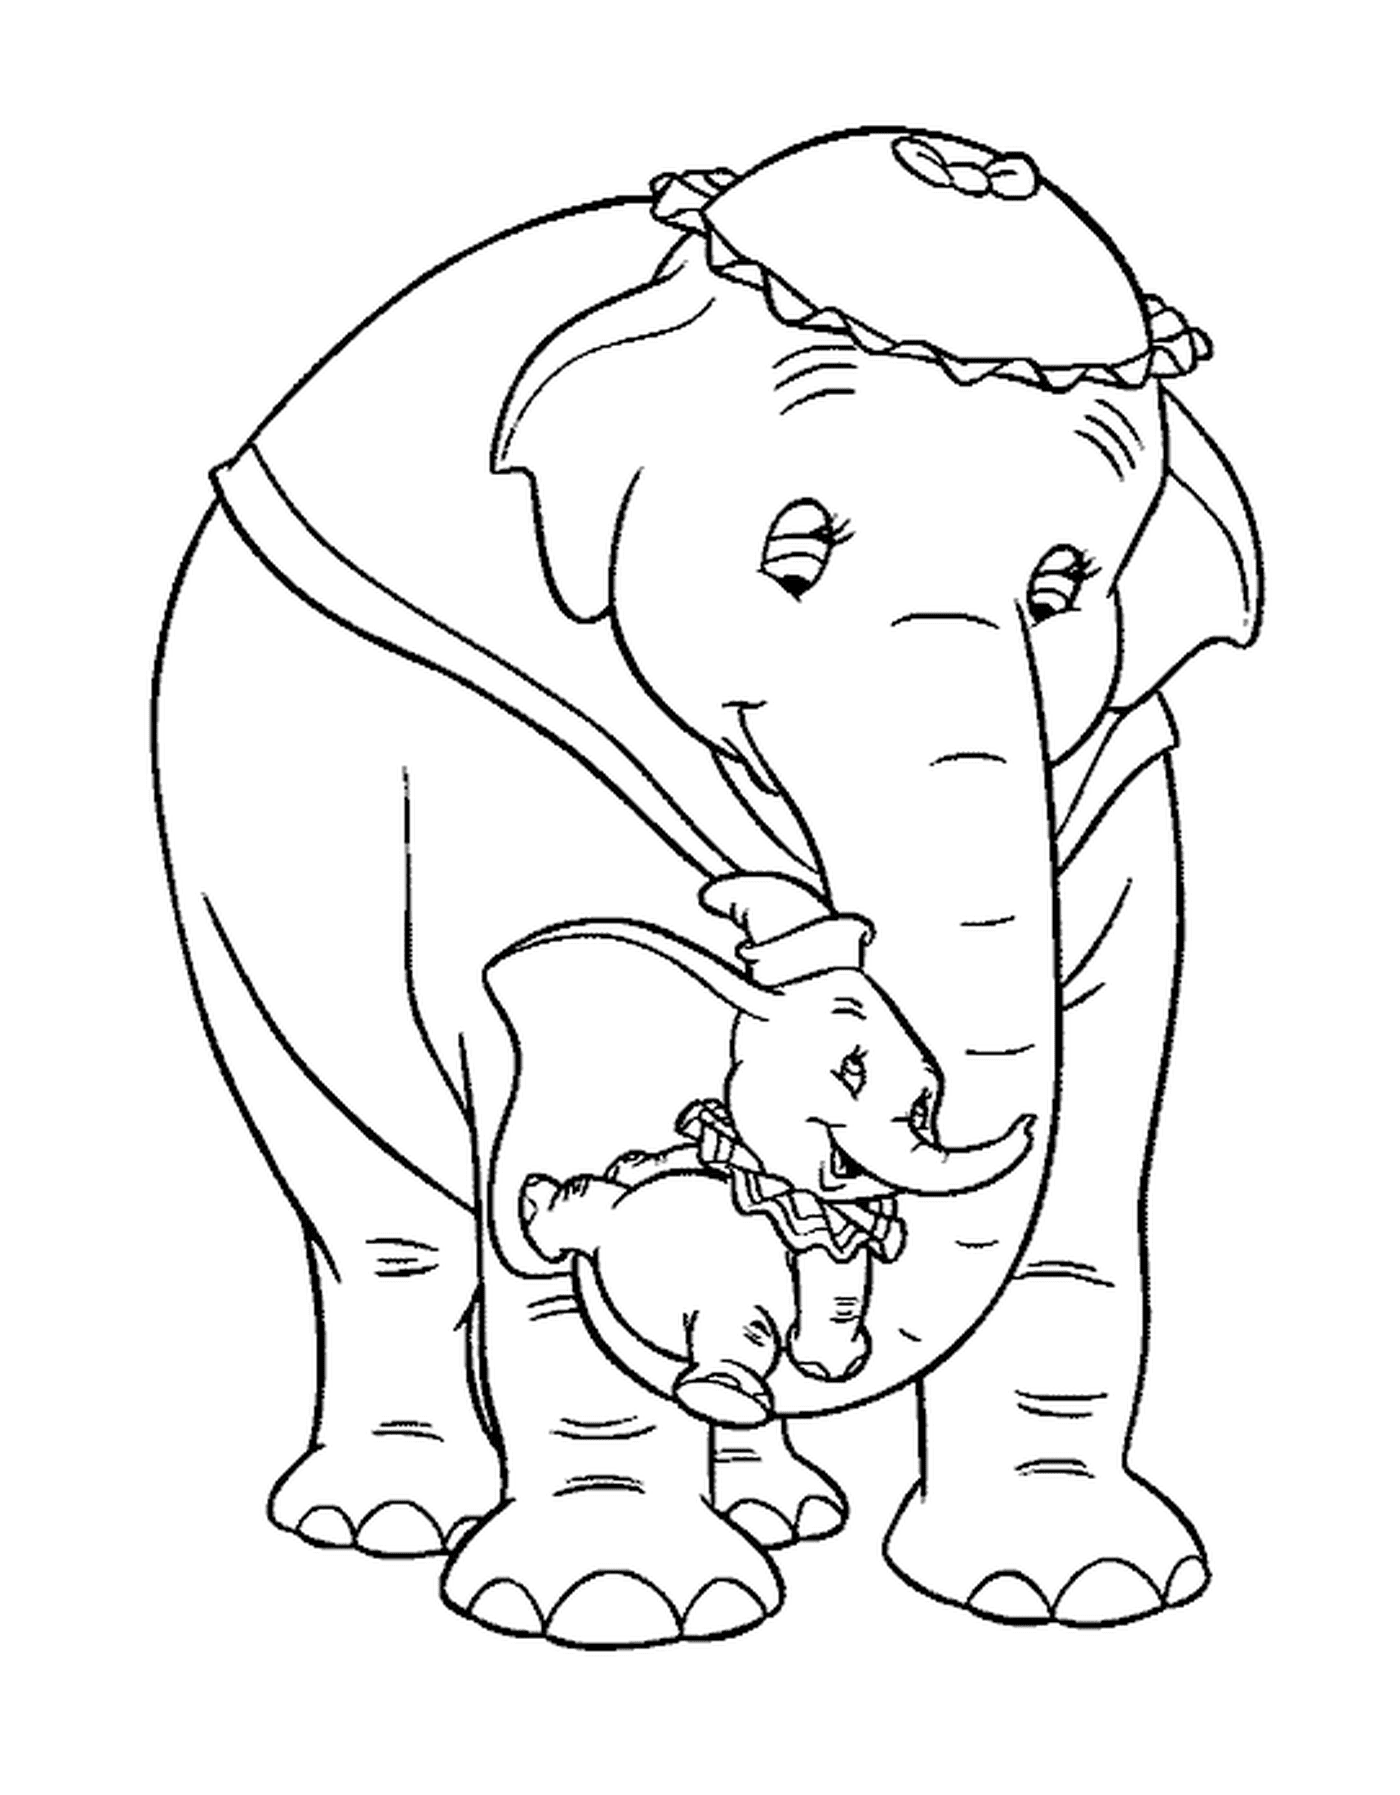  An adult elephant and his kid next door 